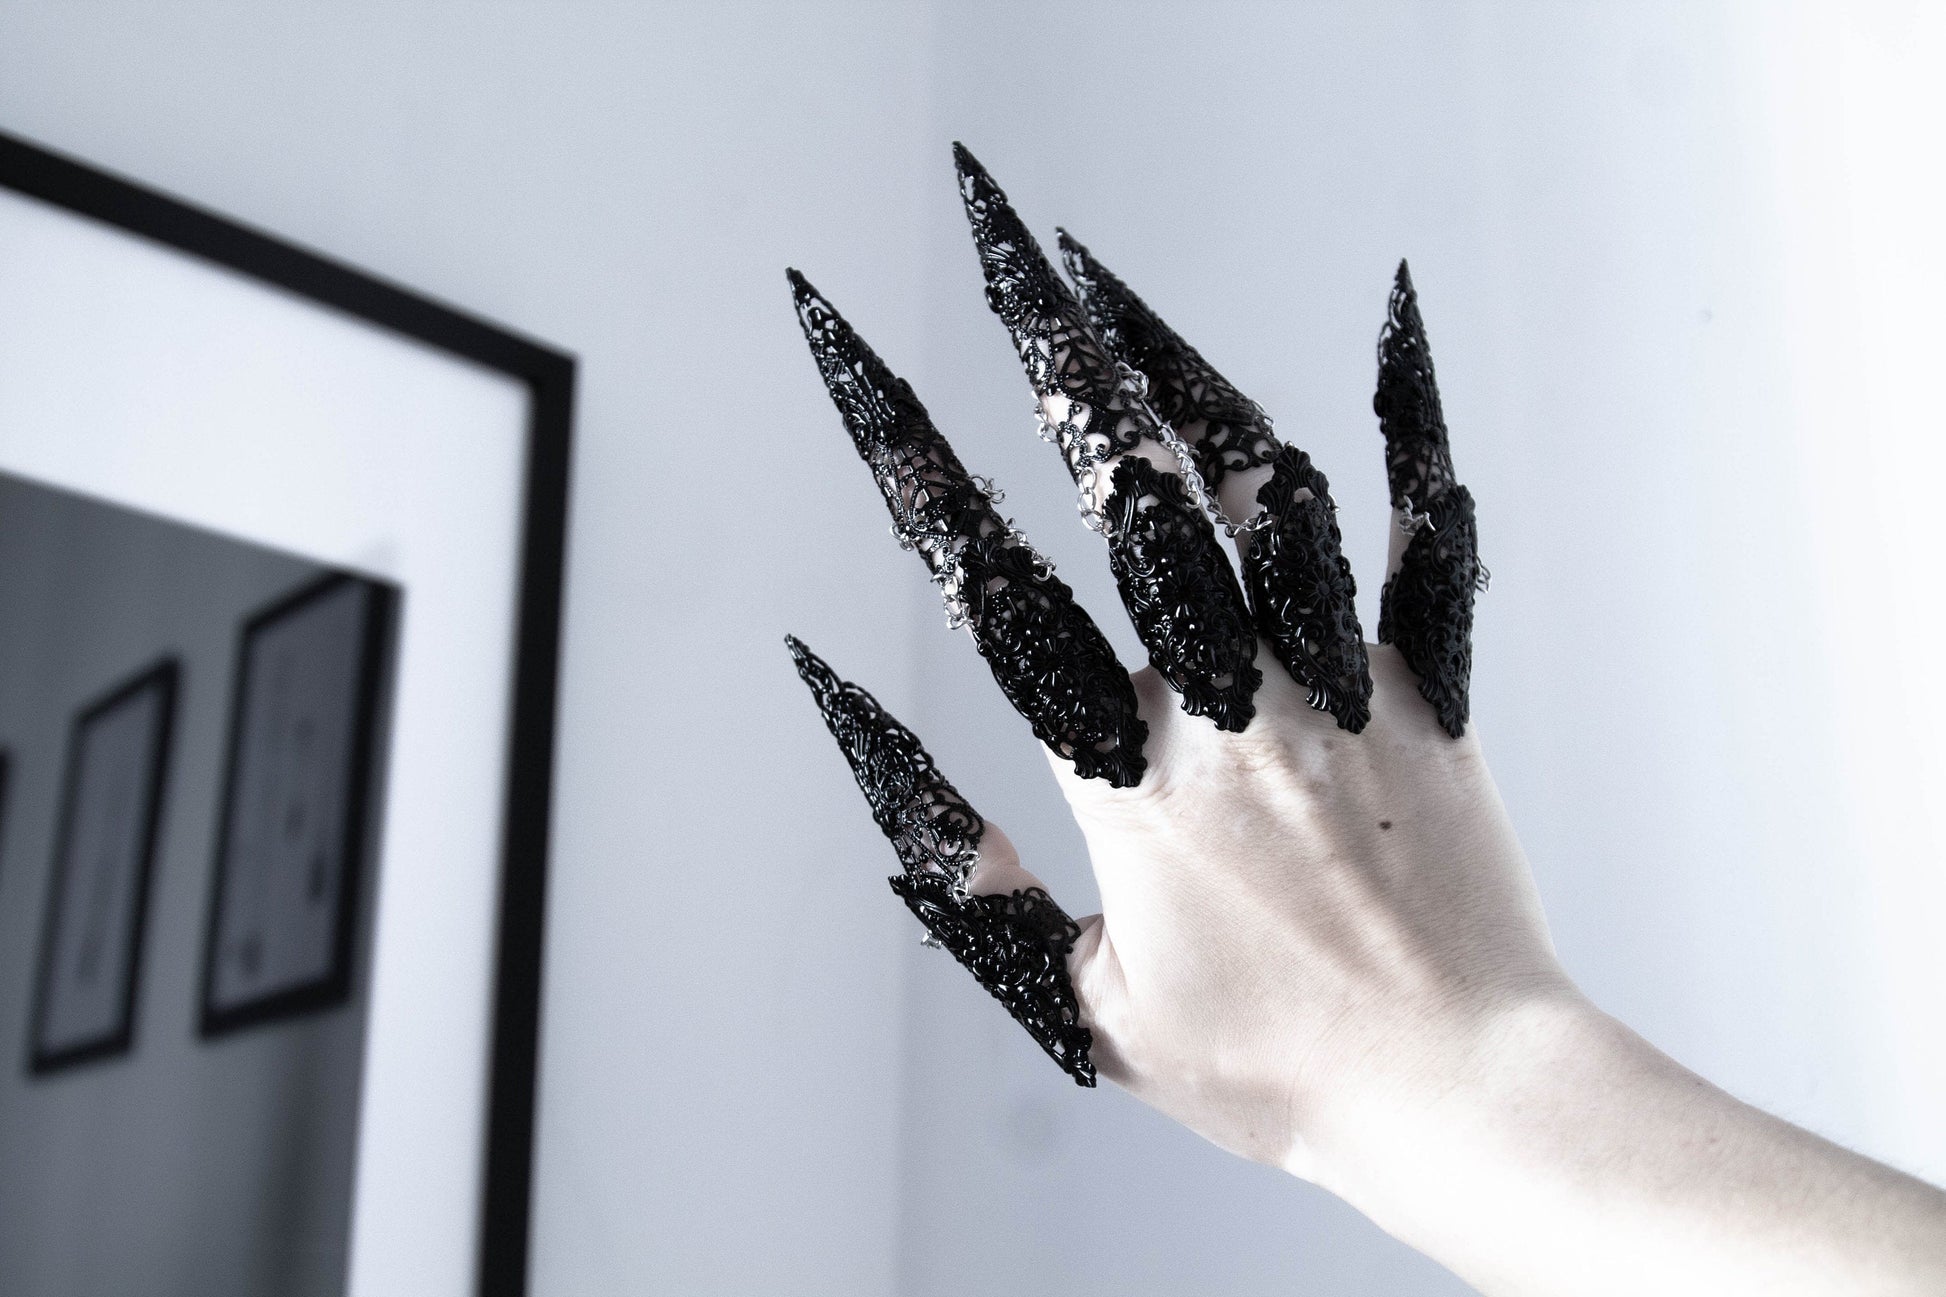 Striking Myril Jewels hand adornment, featuring gothic black full finger rings with elongated claws, merging witchcore aesthetics with neo-gothic design, perfect for an avant-garde fashion statement.